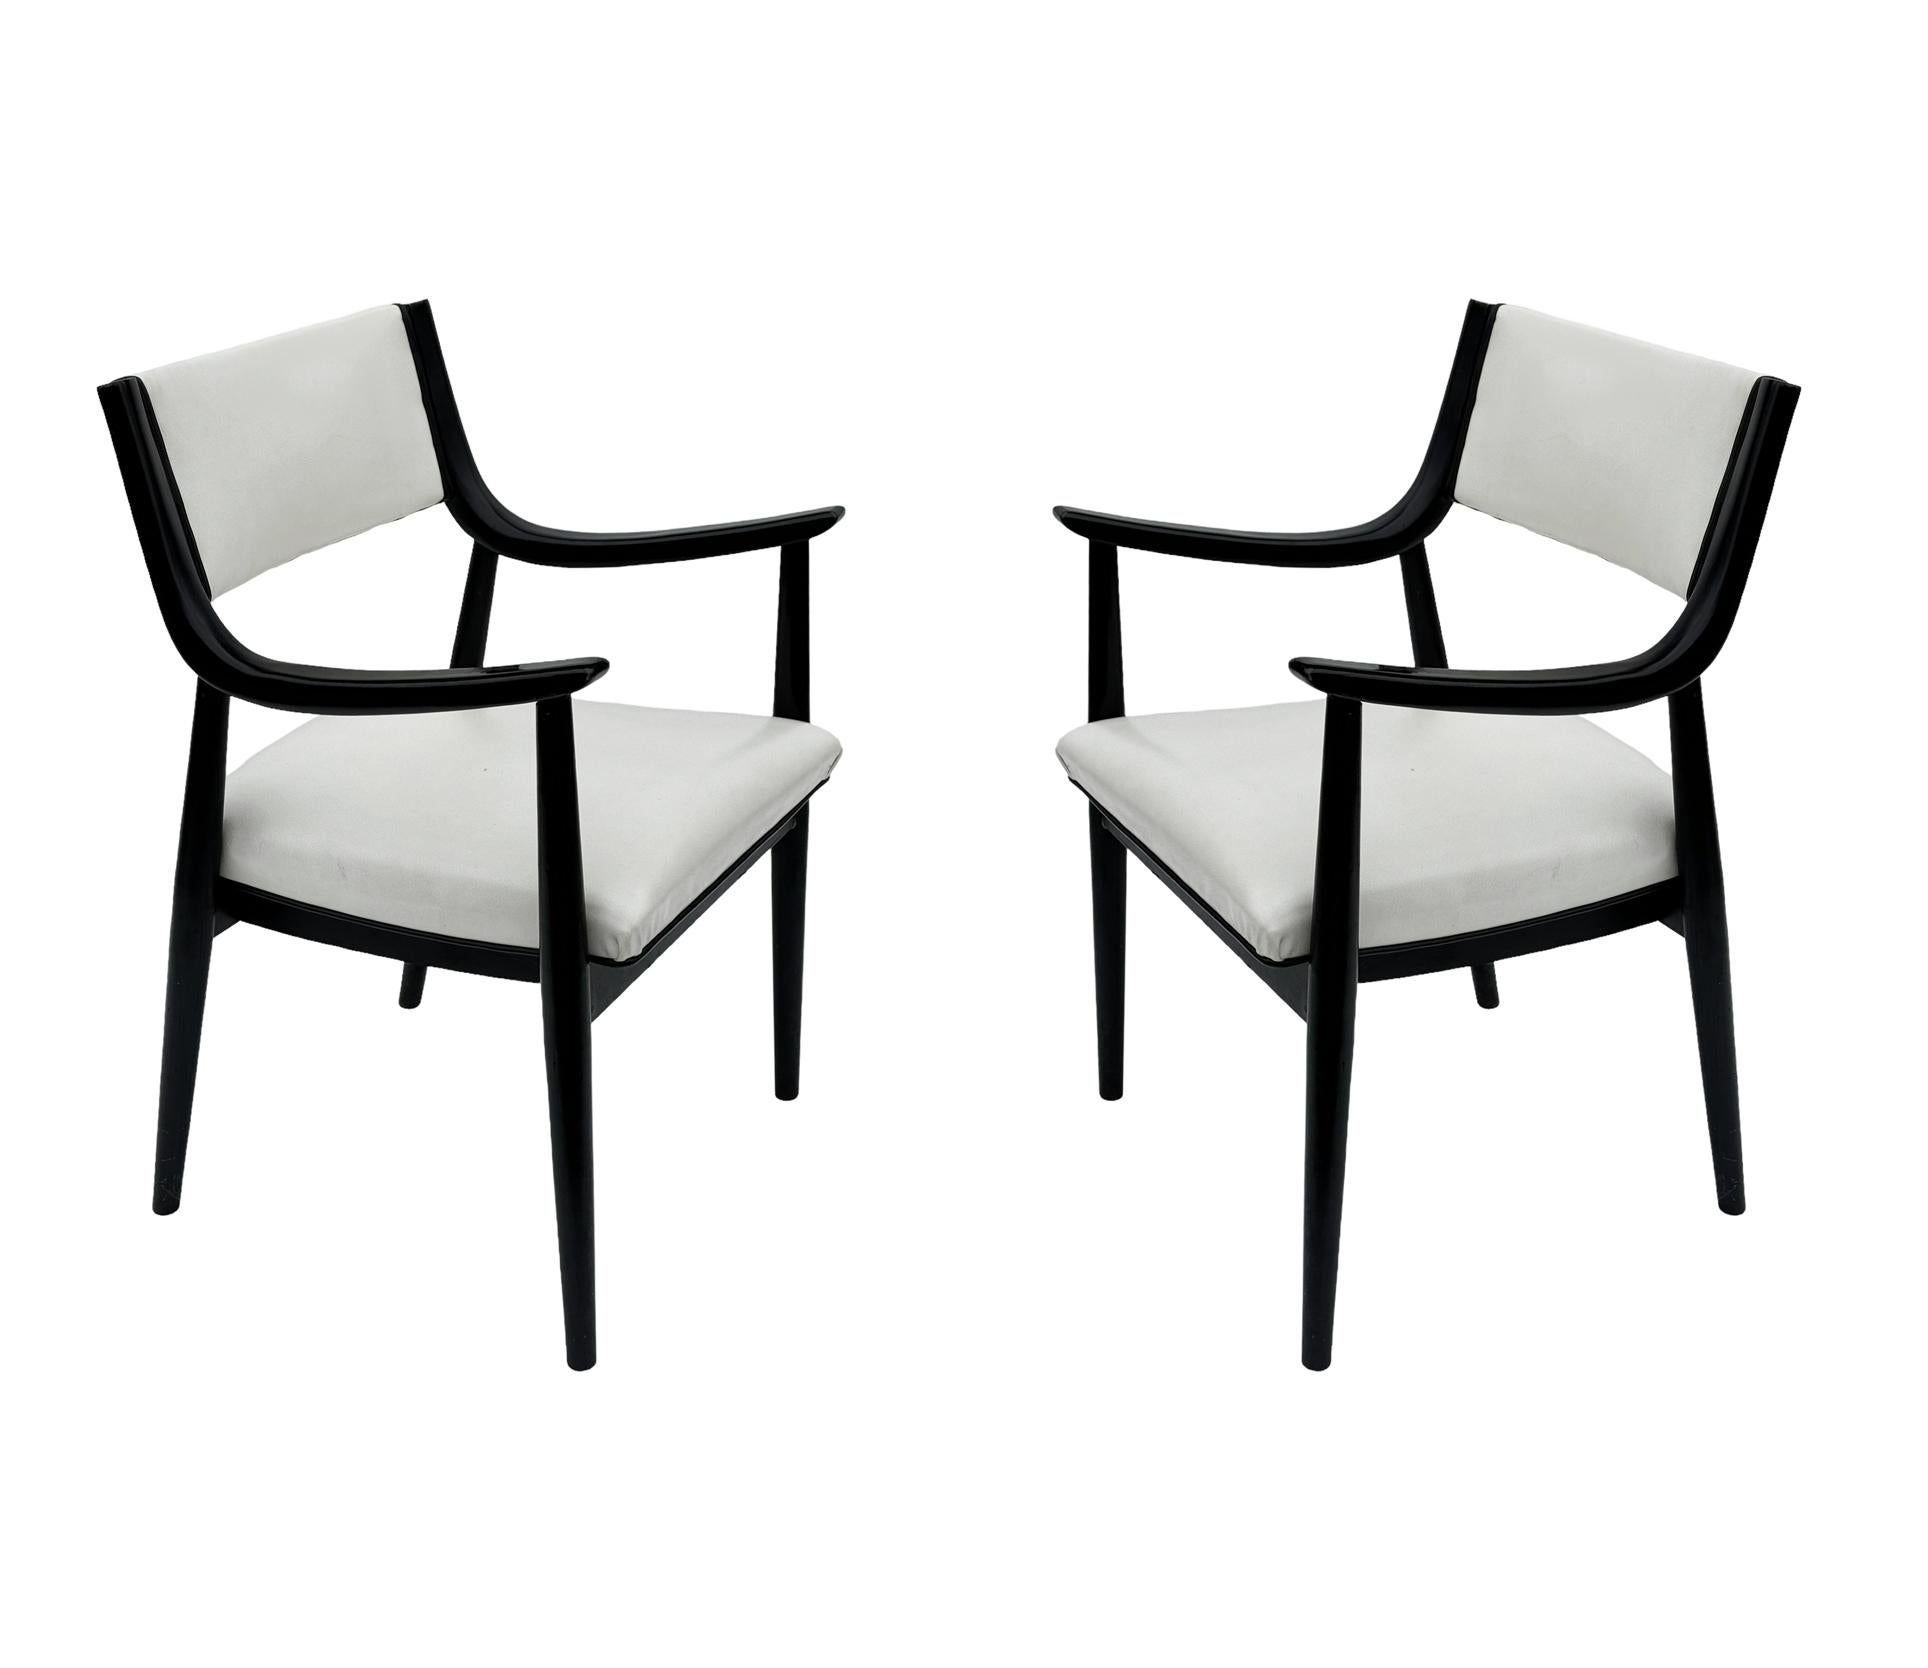 Pair of Mid-Century Modern Black Lacquer Danish Modern Style Armchairs in White For Sale 5